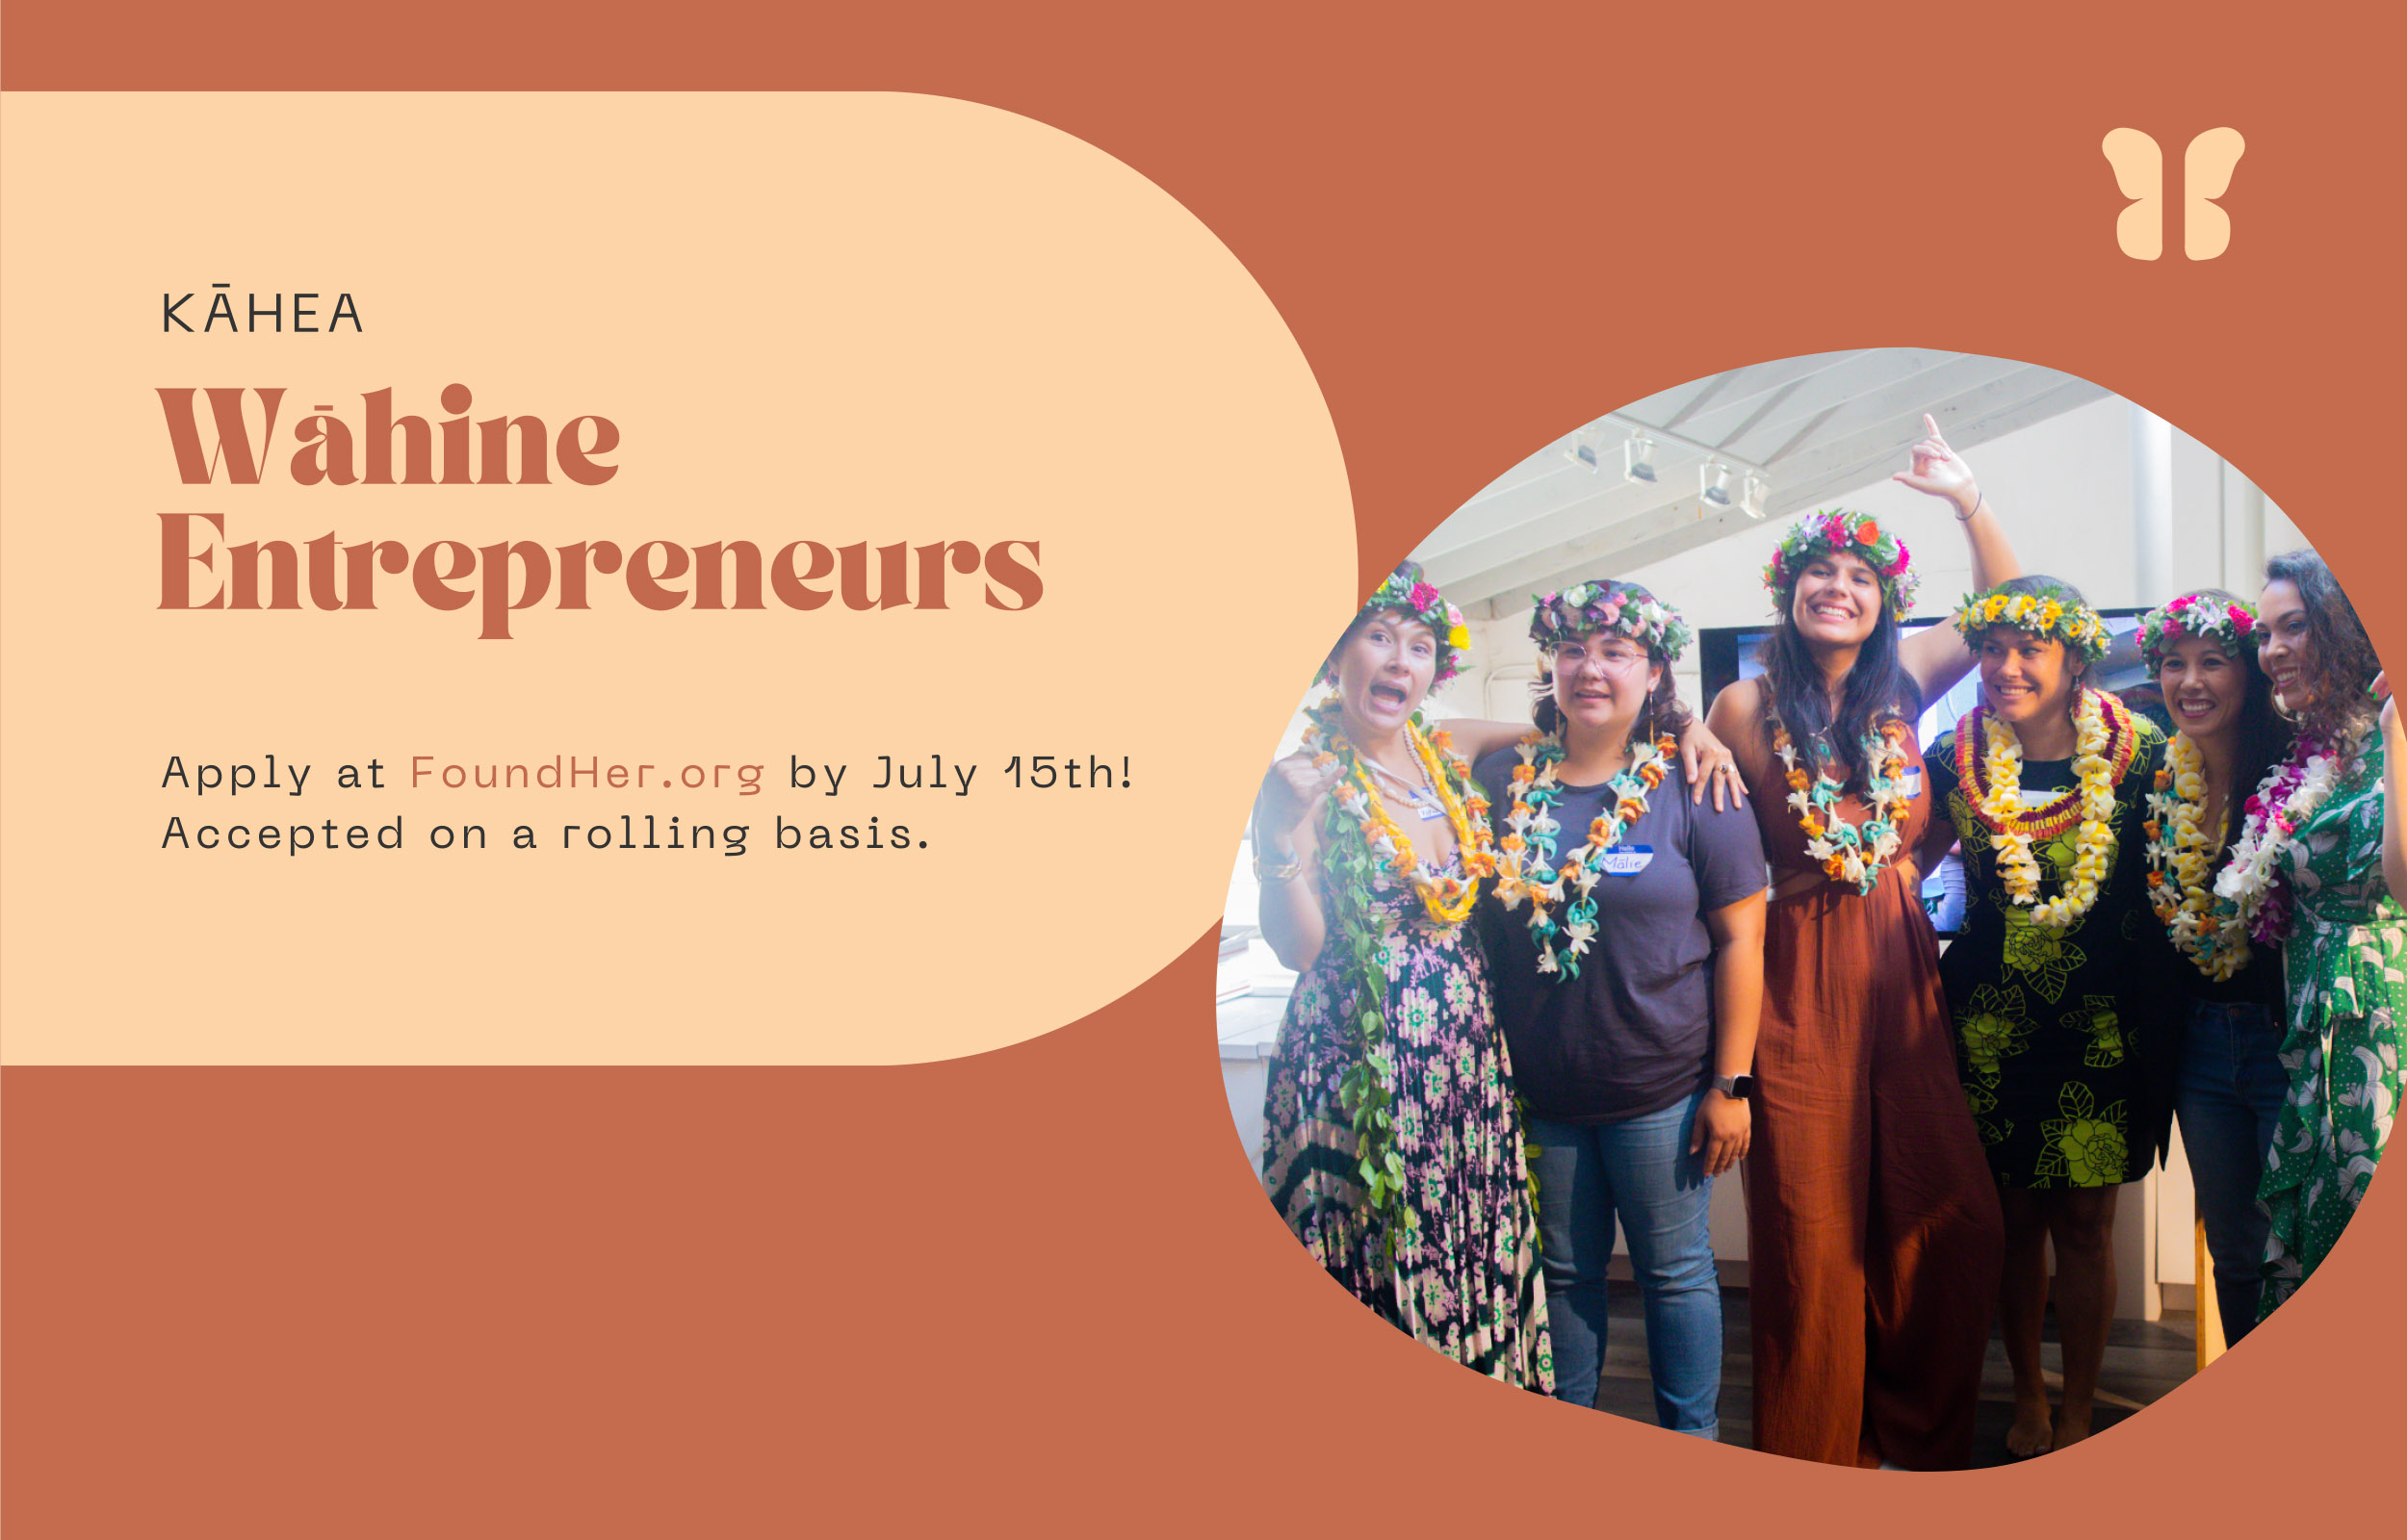 Kāhea - Wāhine Entrepreneurs - Apply at FoundHer.org by July 15th! Accepted on a rolling basis